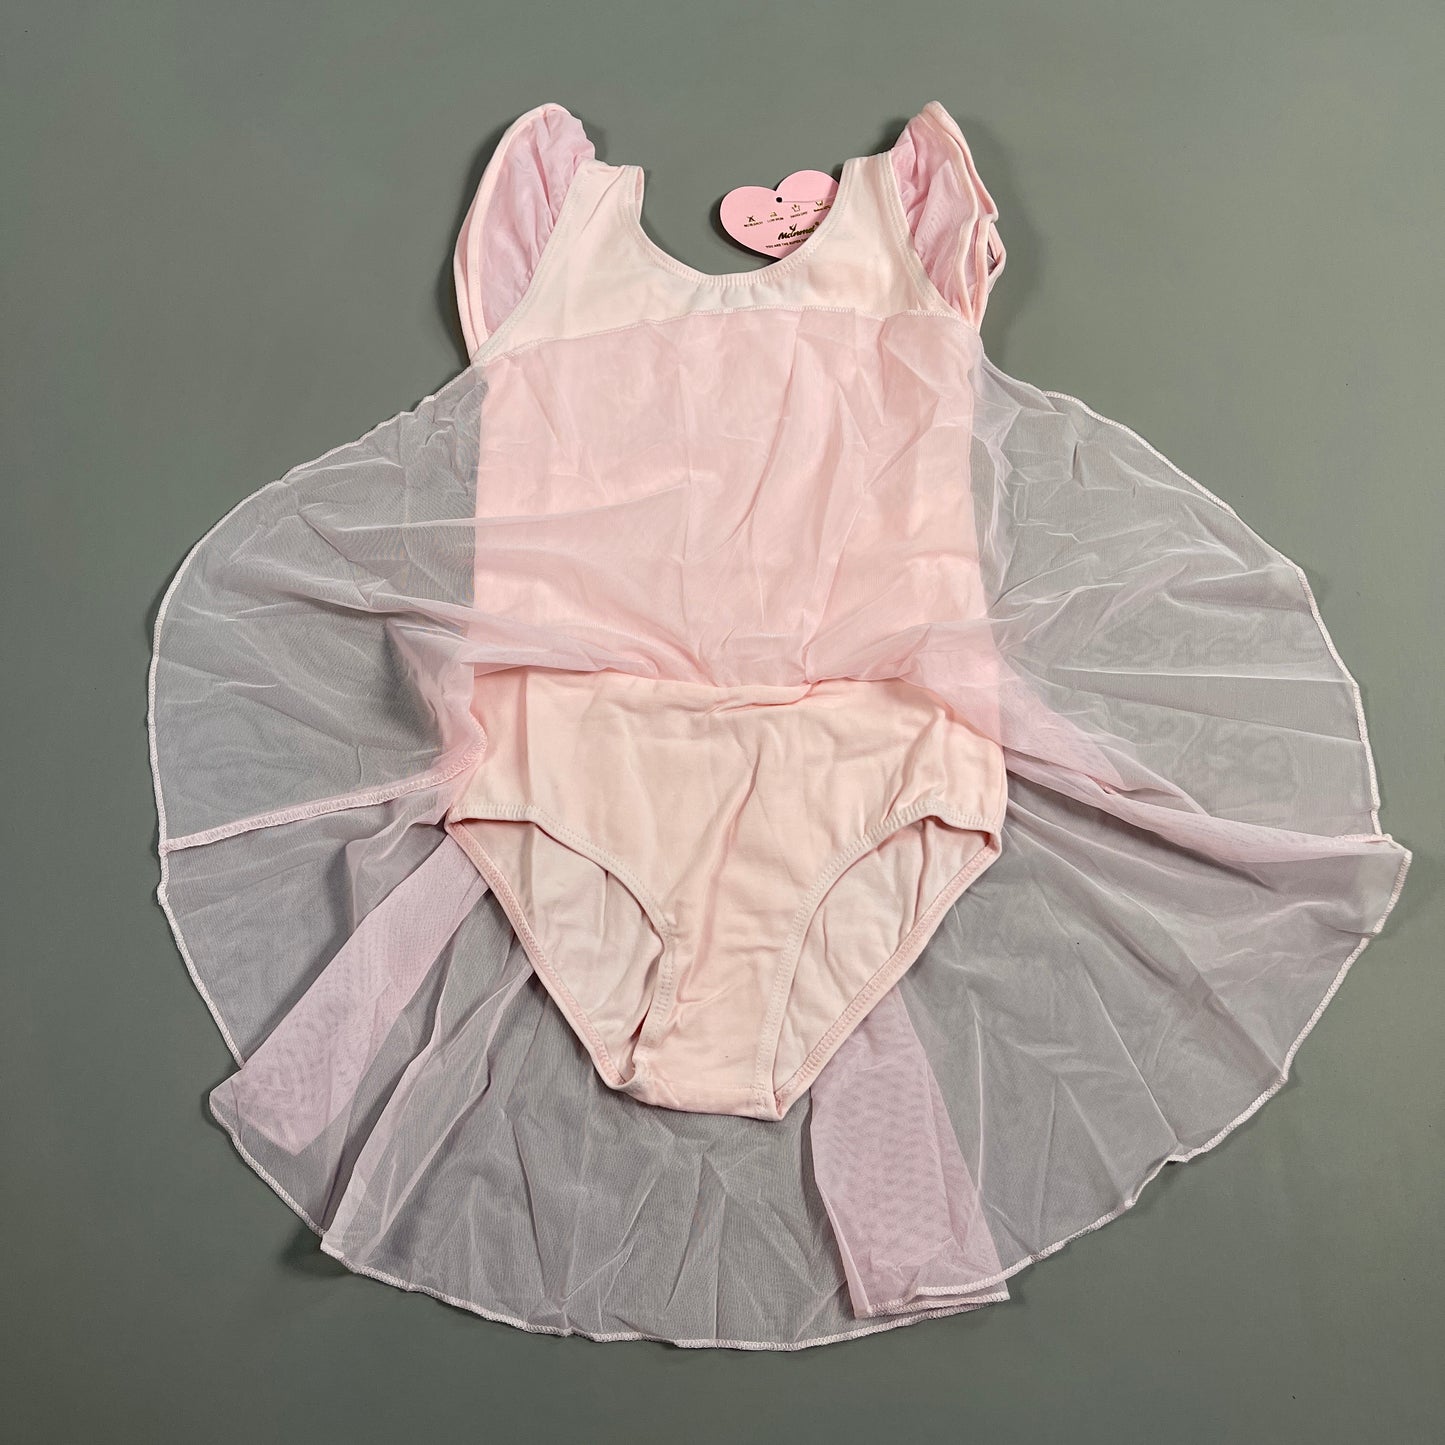 MDNMD Toddler Girls Ballet, Dance, Gymnastic, Leotard Flutter Sleeve Outfit With Skirt Sz 6-7 Pink (New)